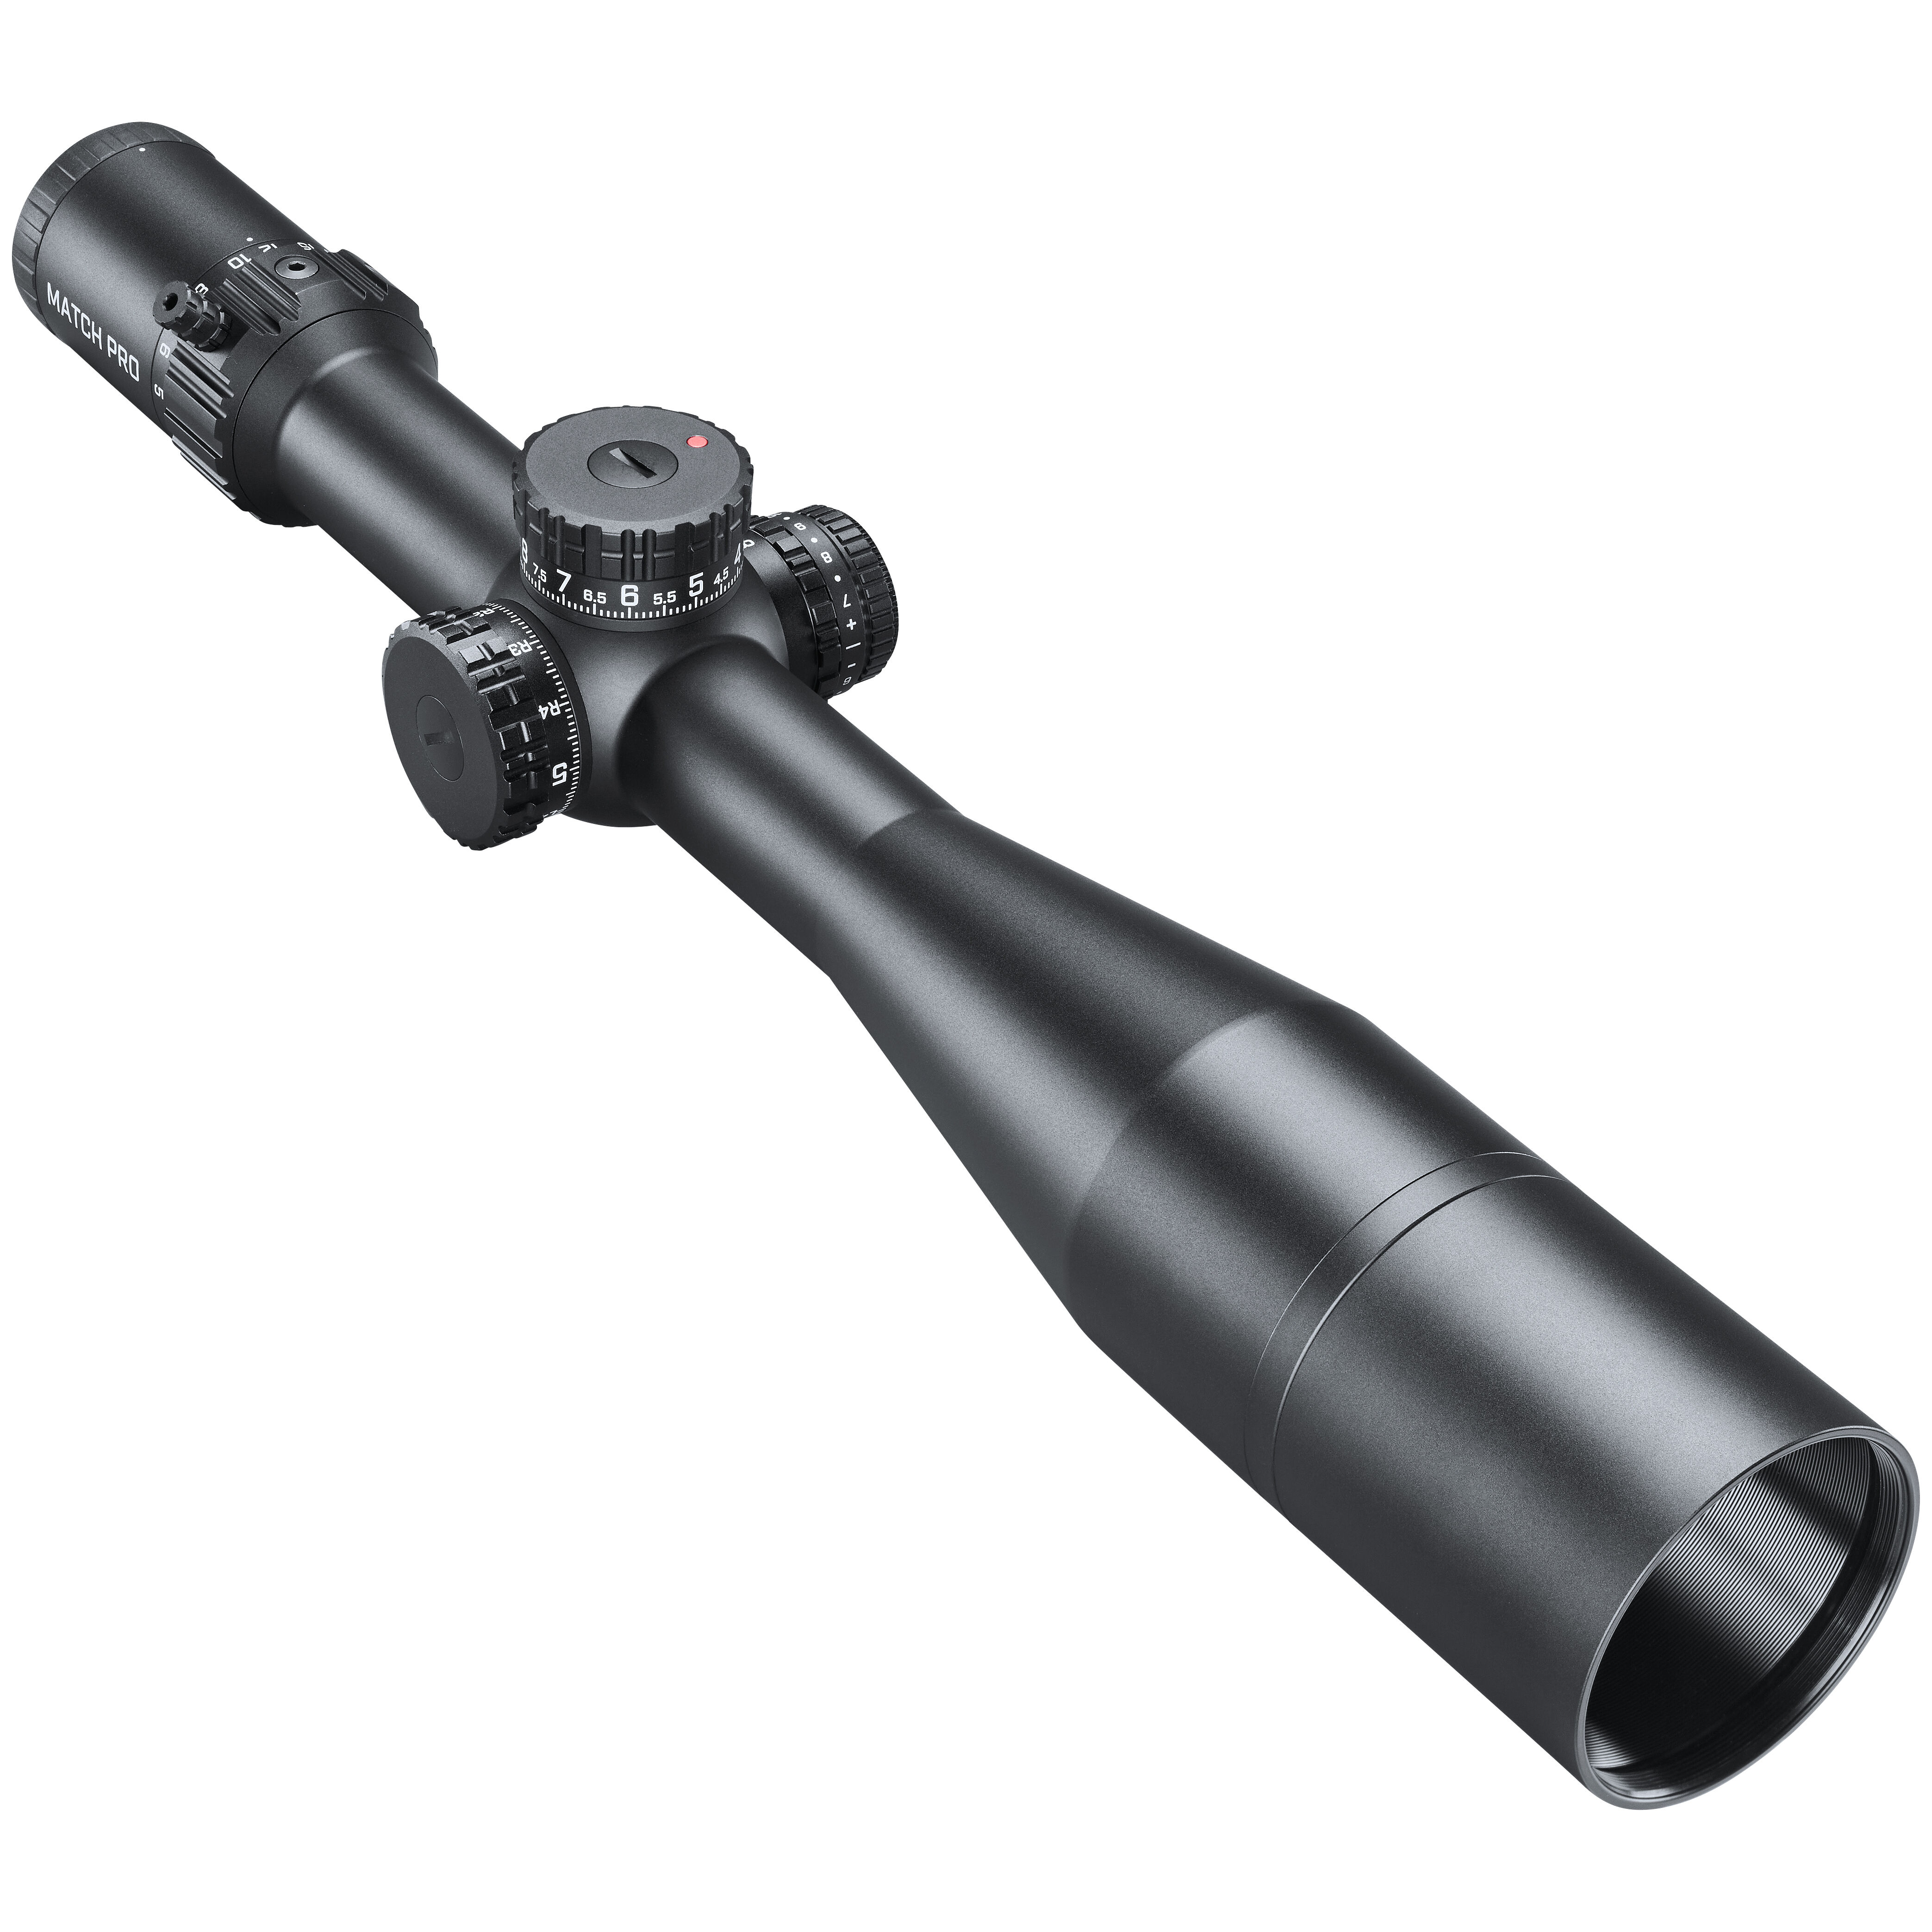 Buy New Riflescopes and More. Shop Today For All of Your Outdoor 